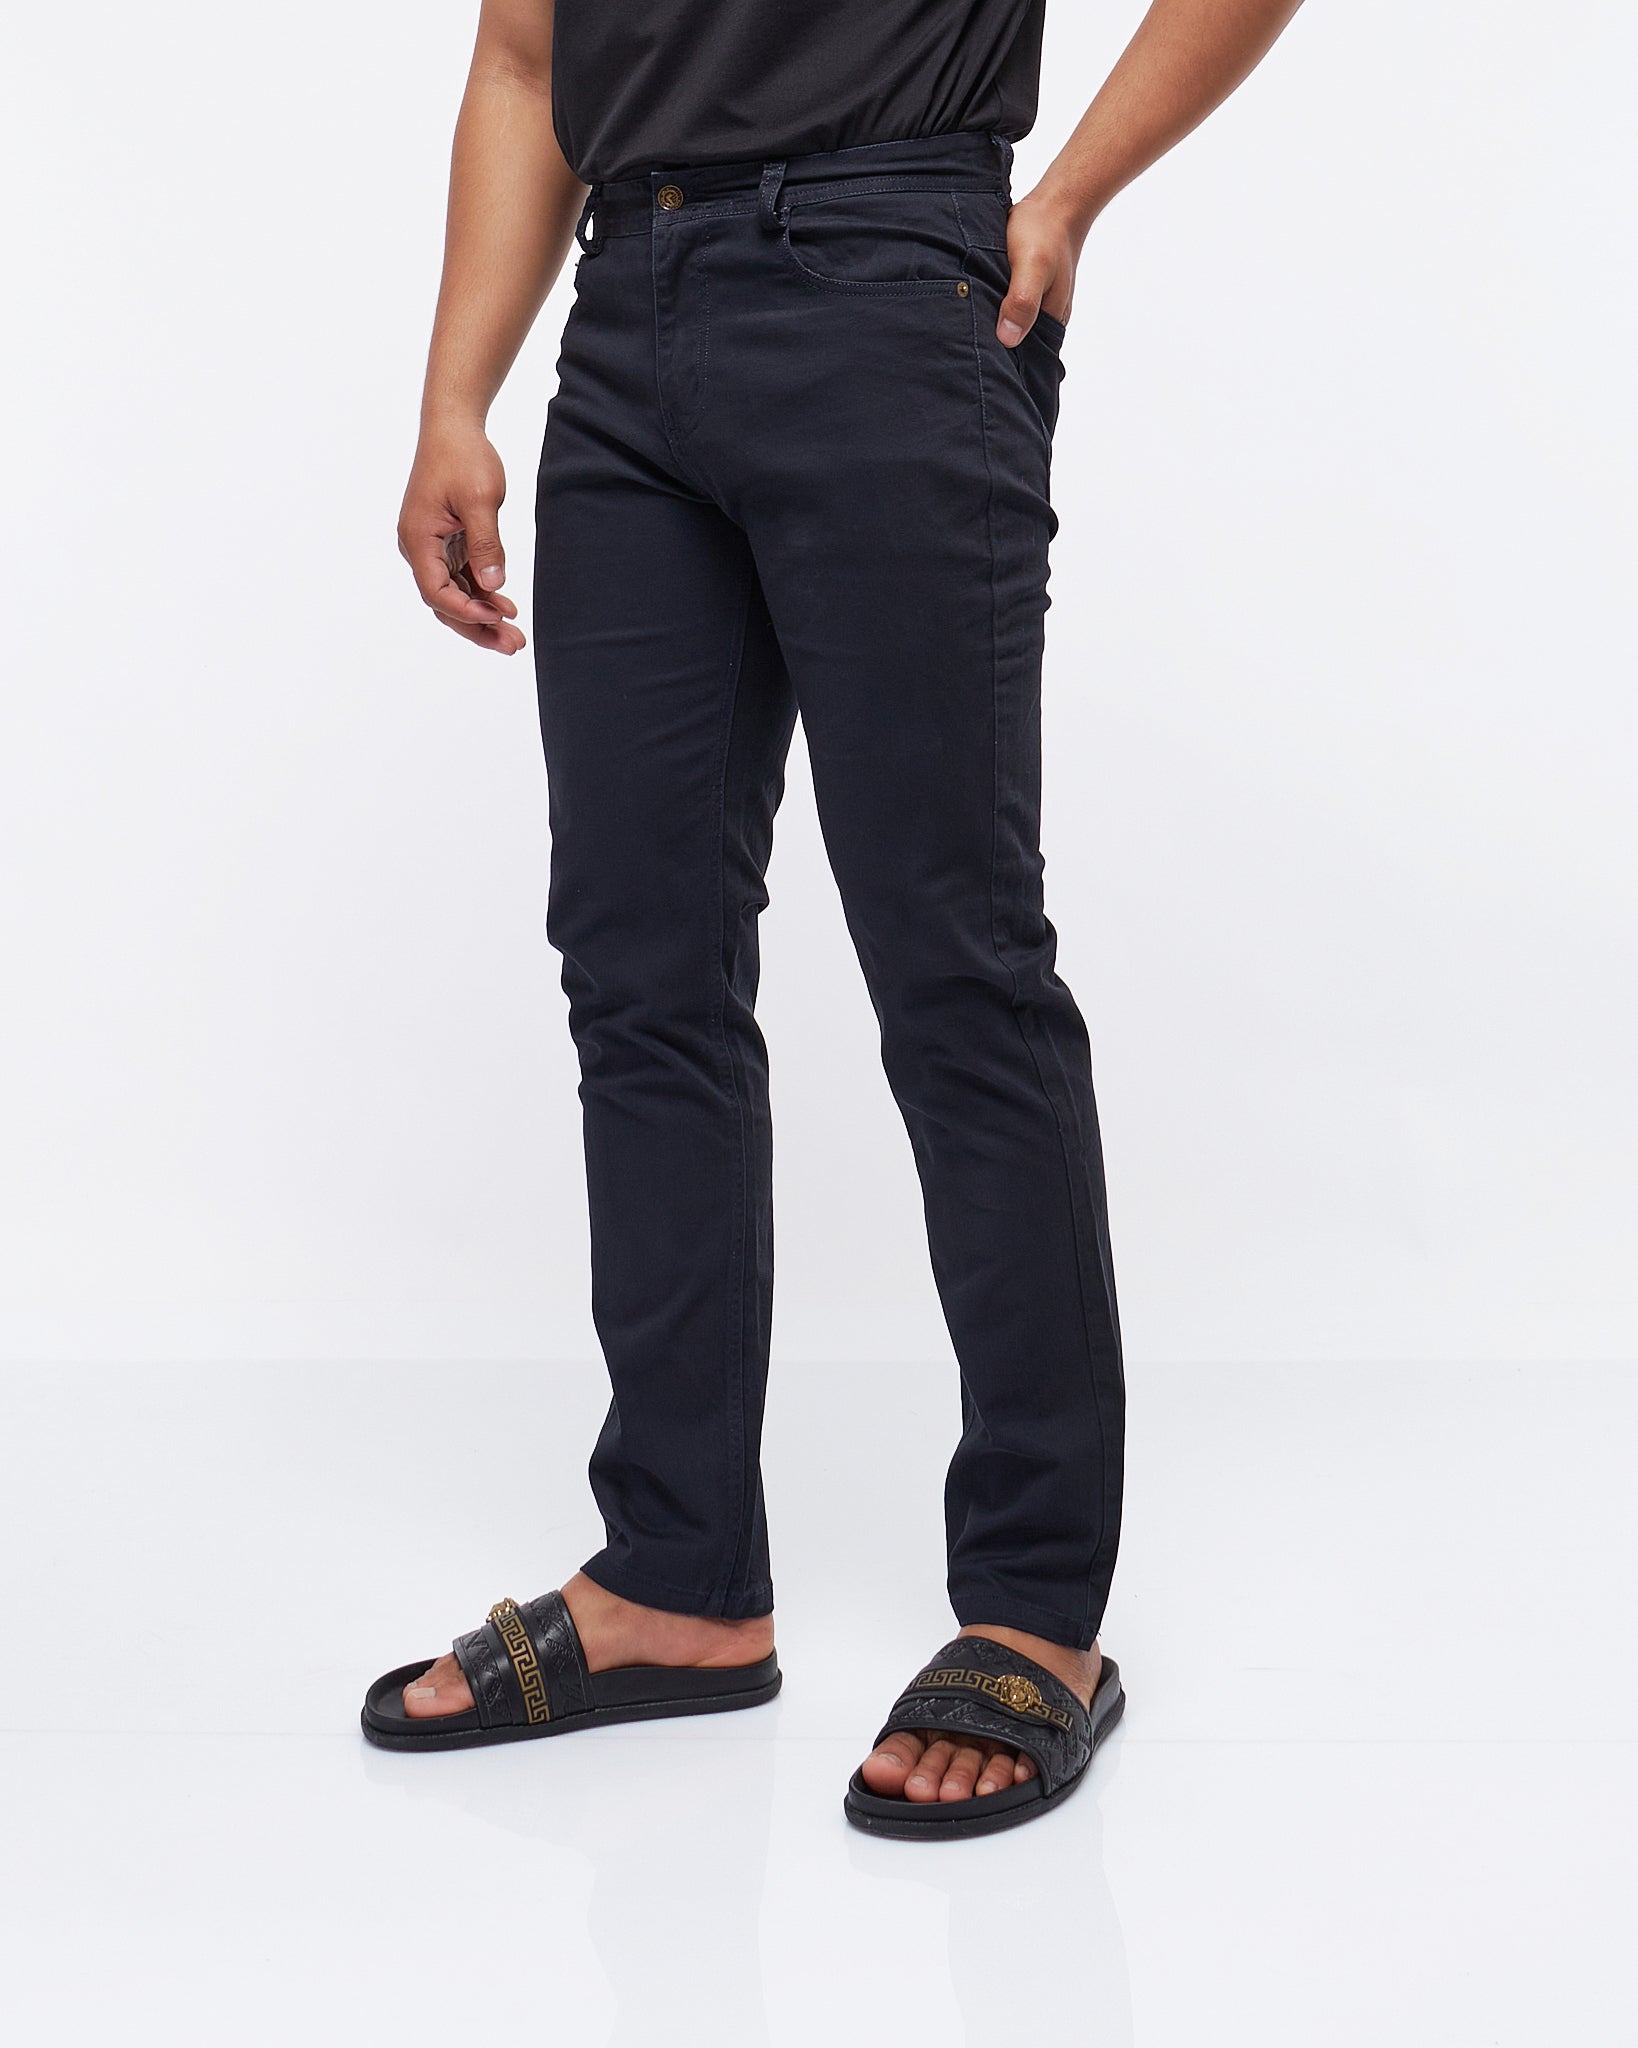 MOI OUTFIT-Solid Color Stretchy Men Jeans 23.90